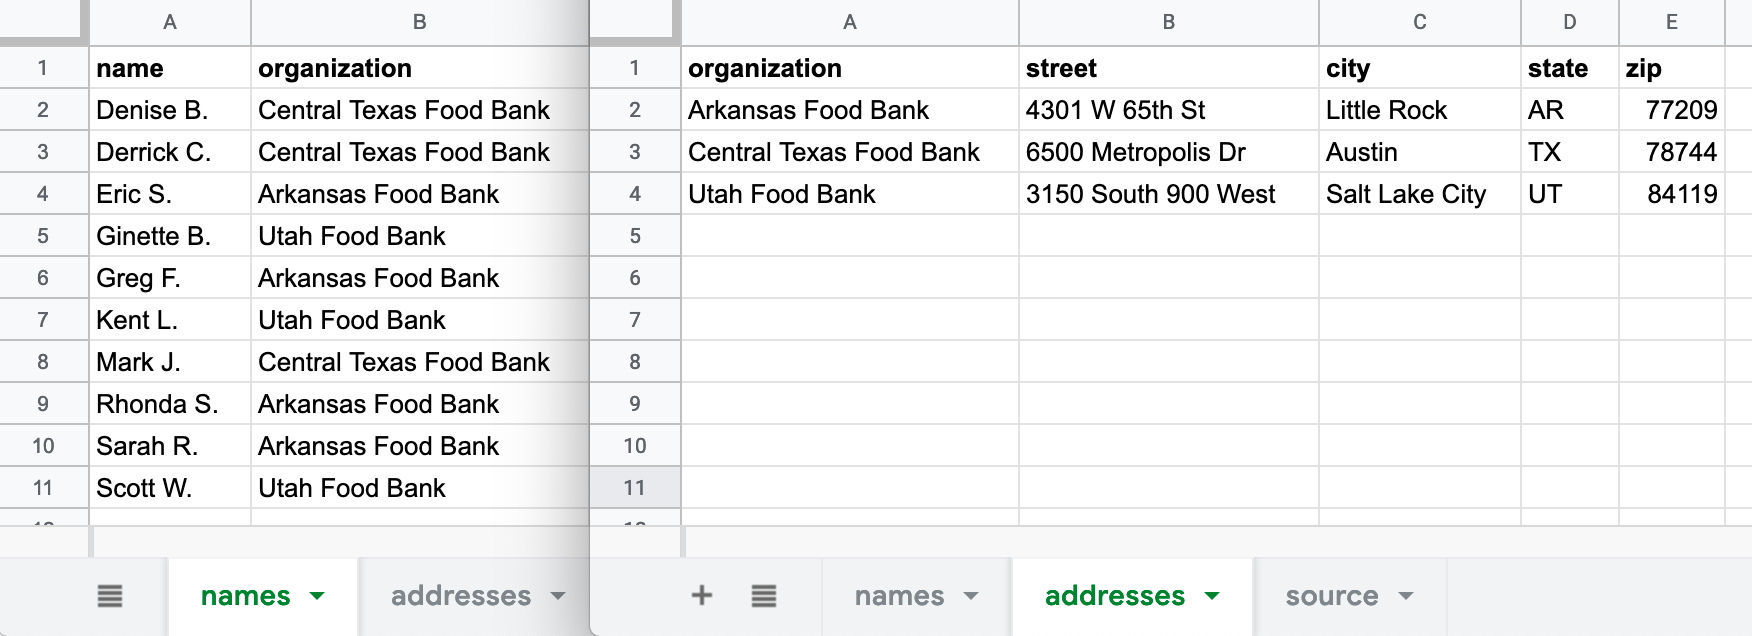 Your goal is to create one mailing list that matches individual names and organizations on the left sheet with their addresses on the right sheet.